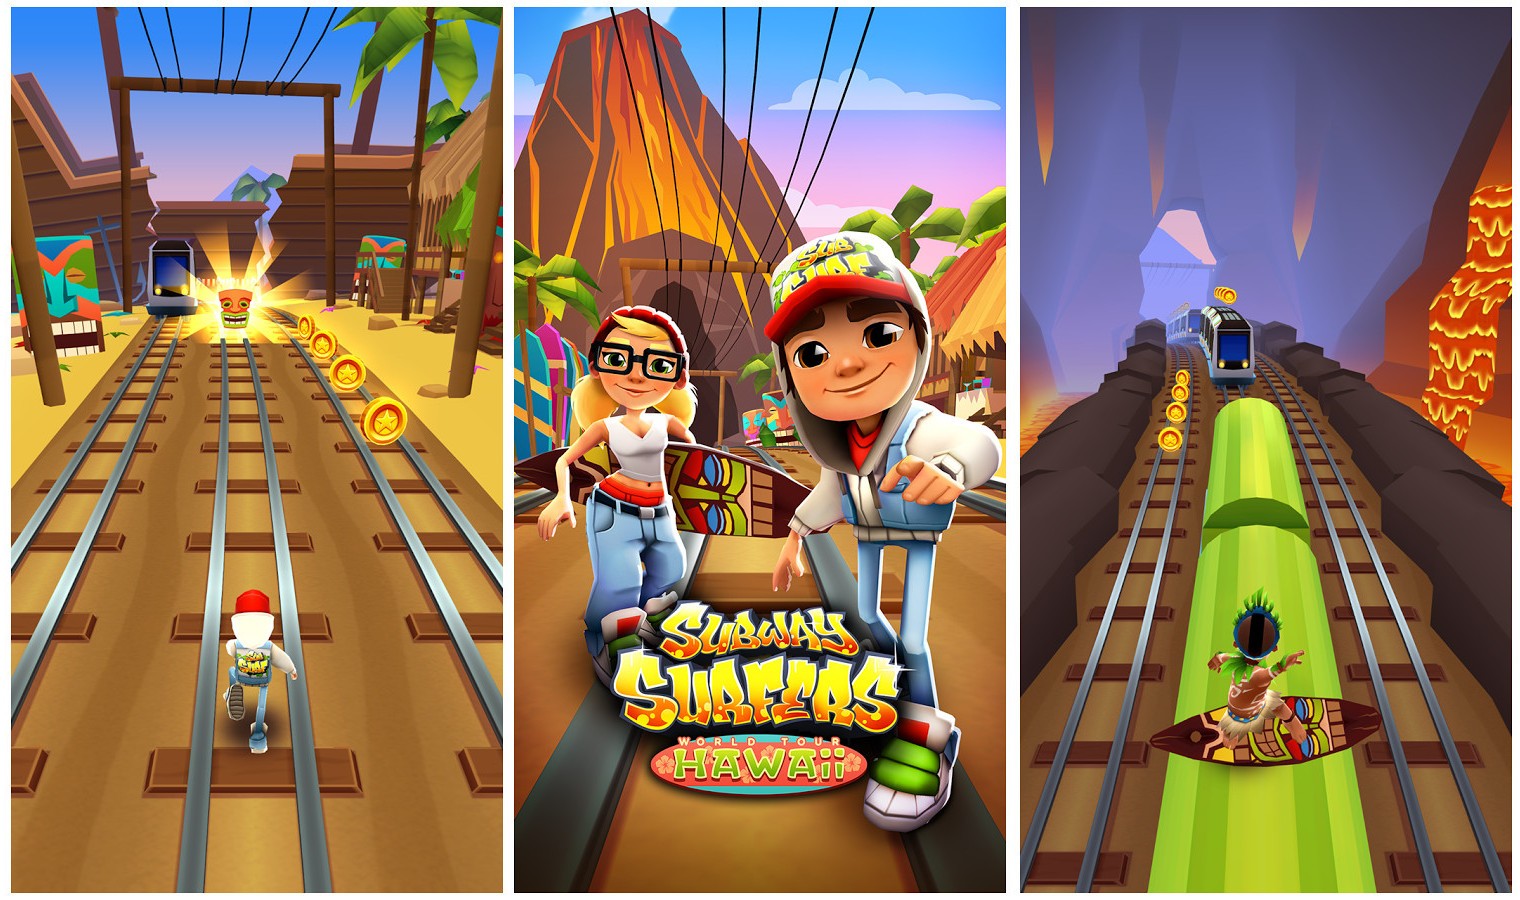 Game Review – Subway Surfers free game for iOS & Android